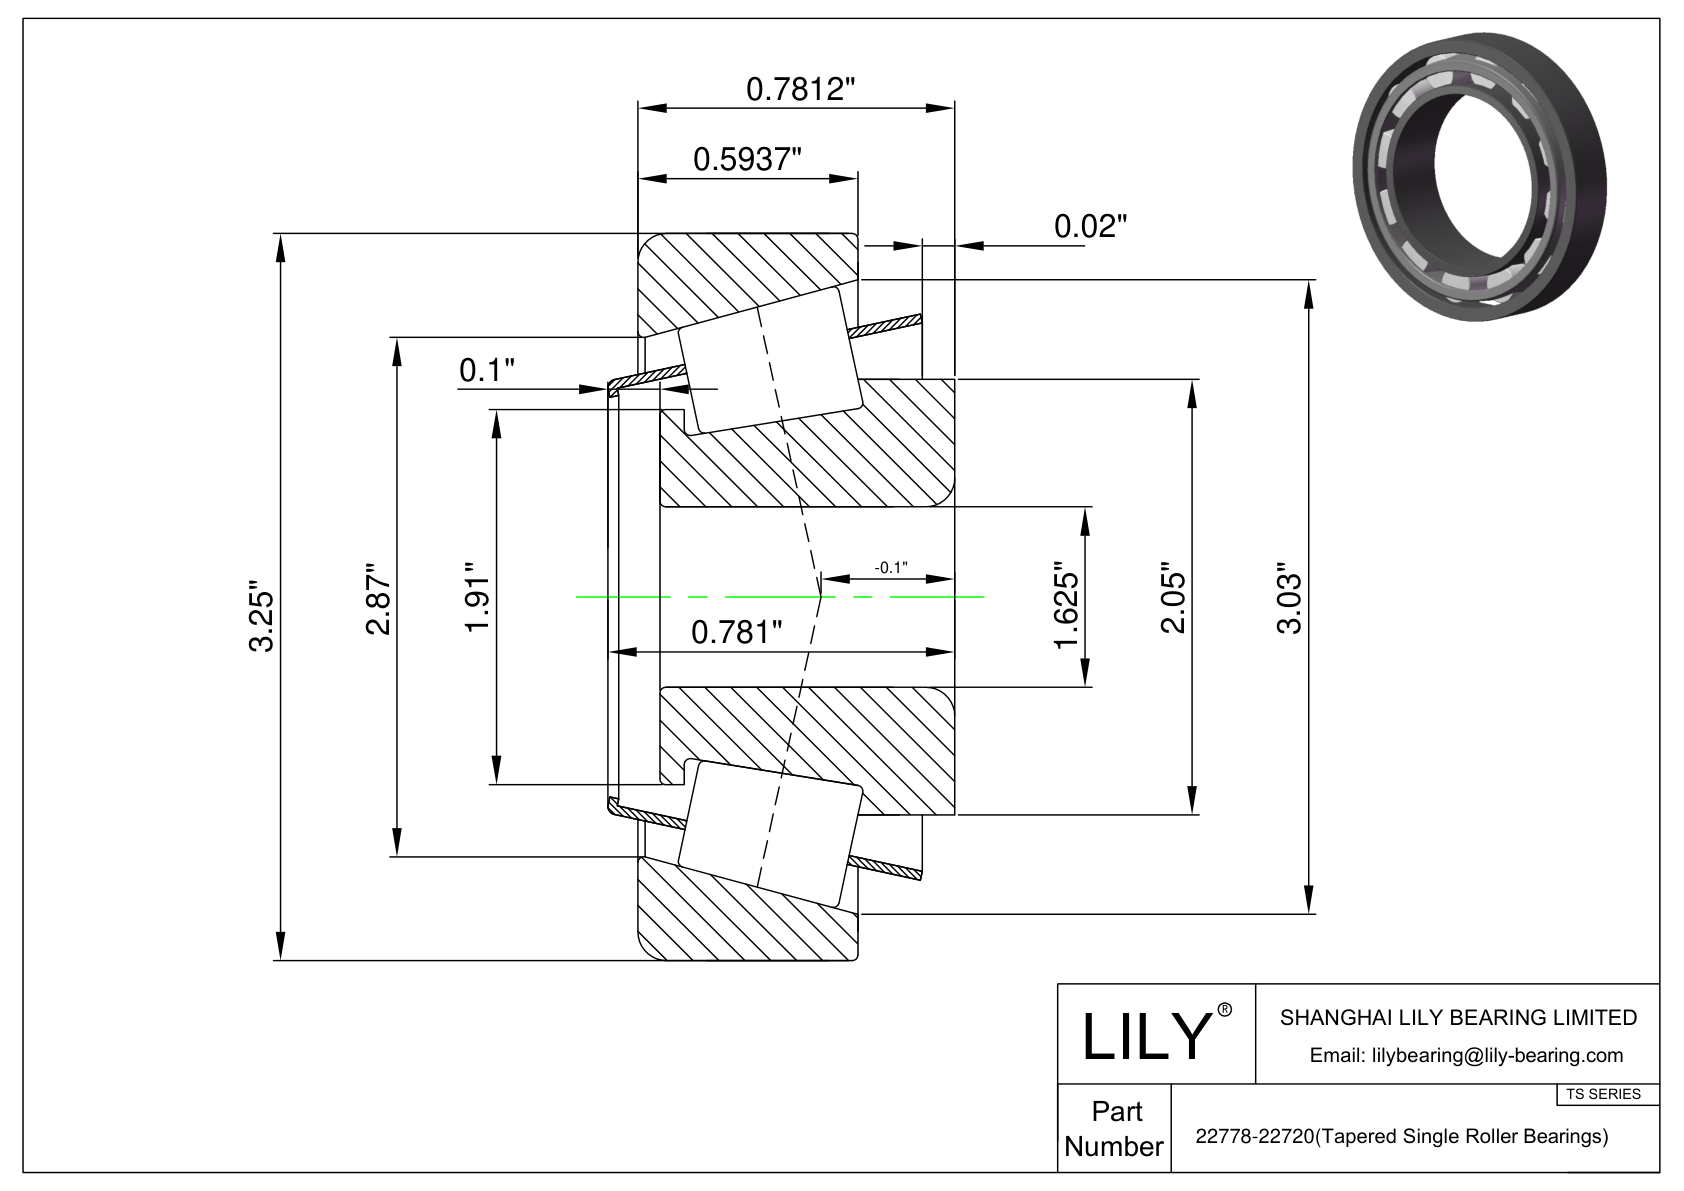 22168-22325 TS (Tapered Single Roller Bearings) (Imperial) cad drawing